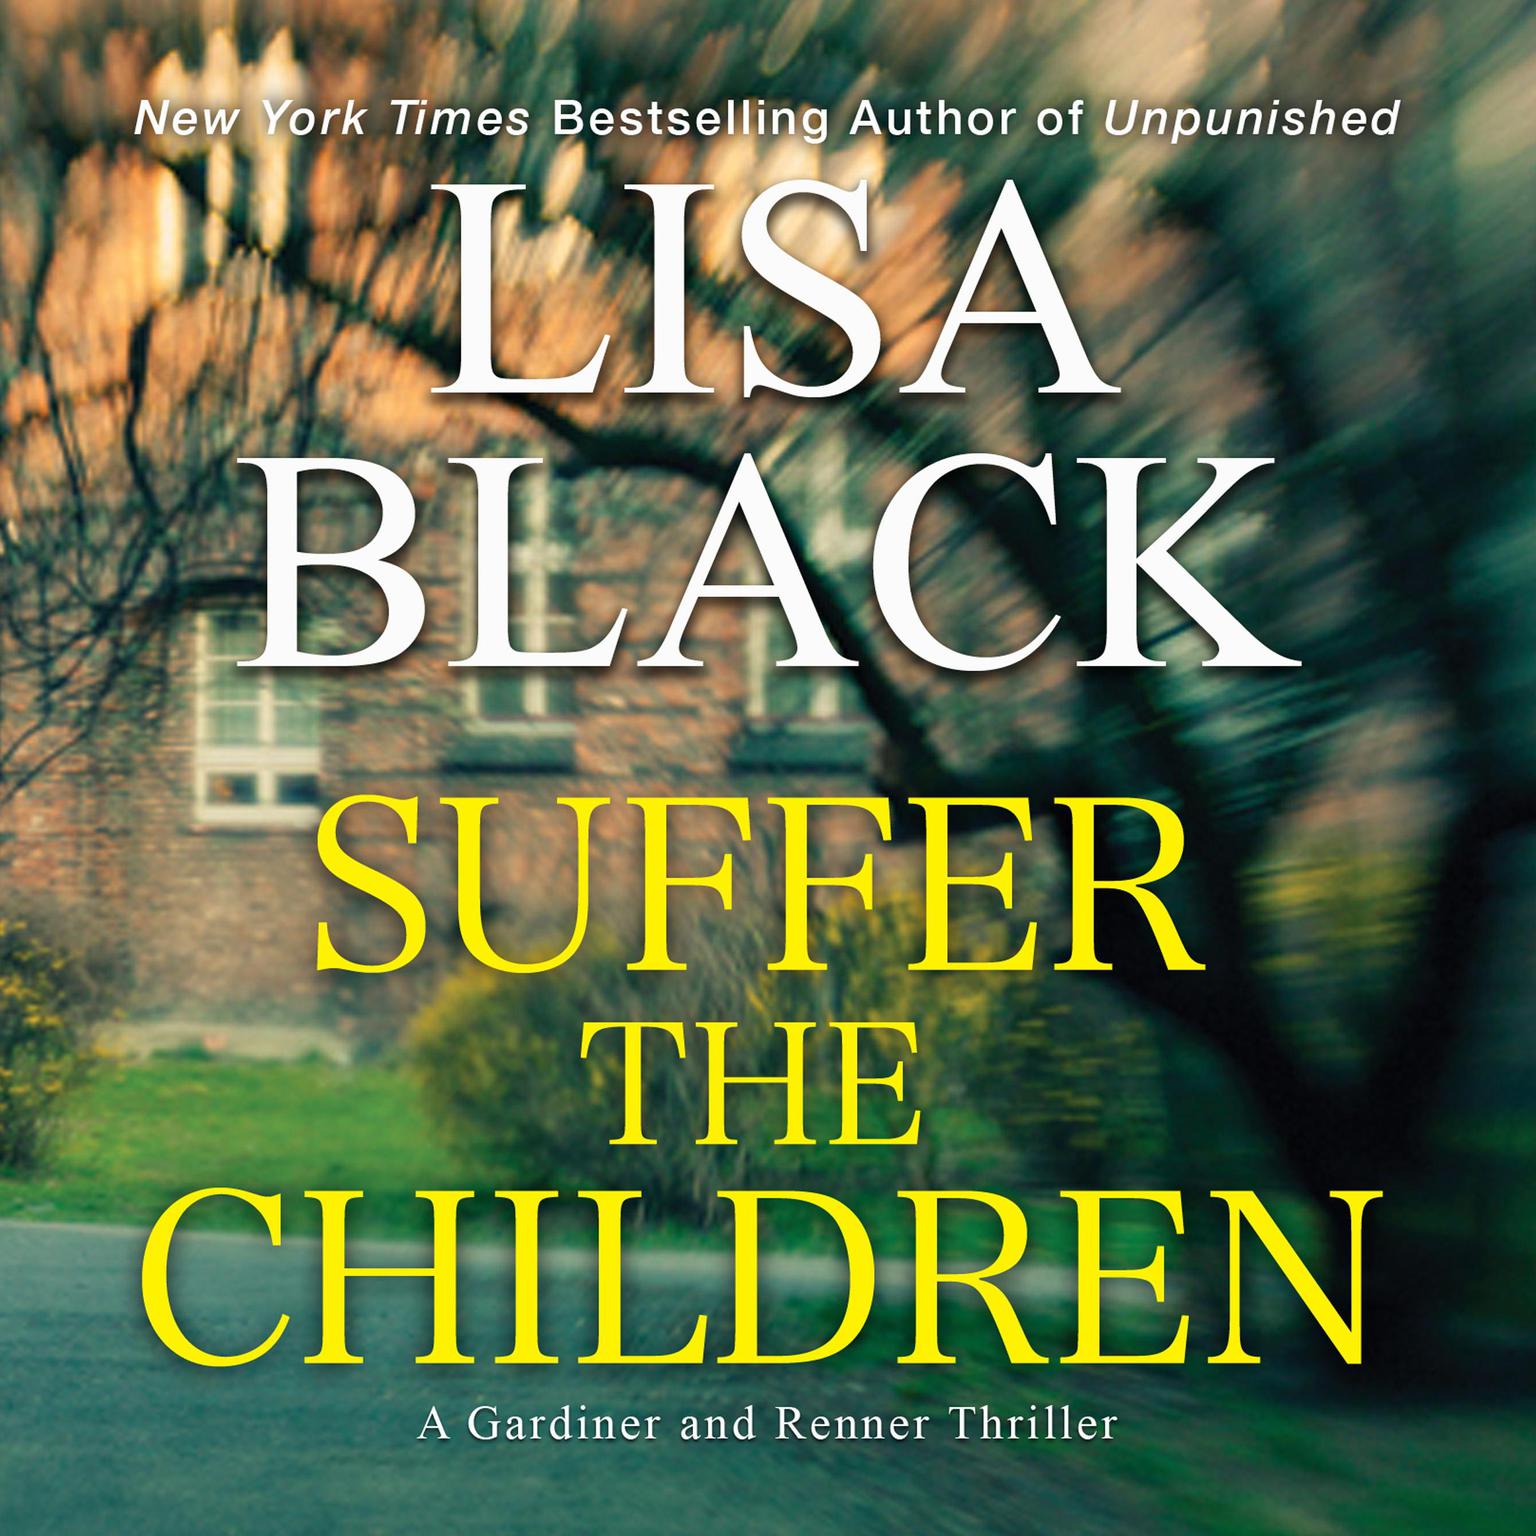 Suffer the Children Audiobook, by Lisa Black